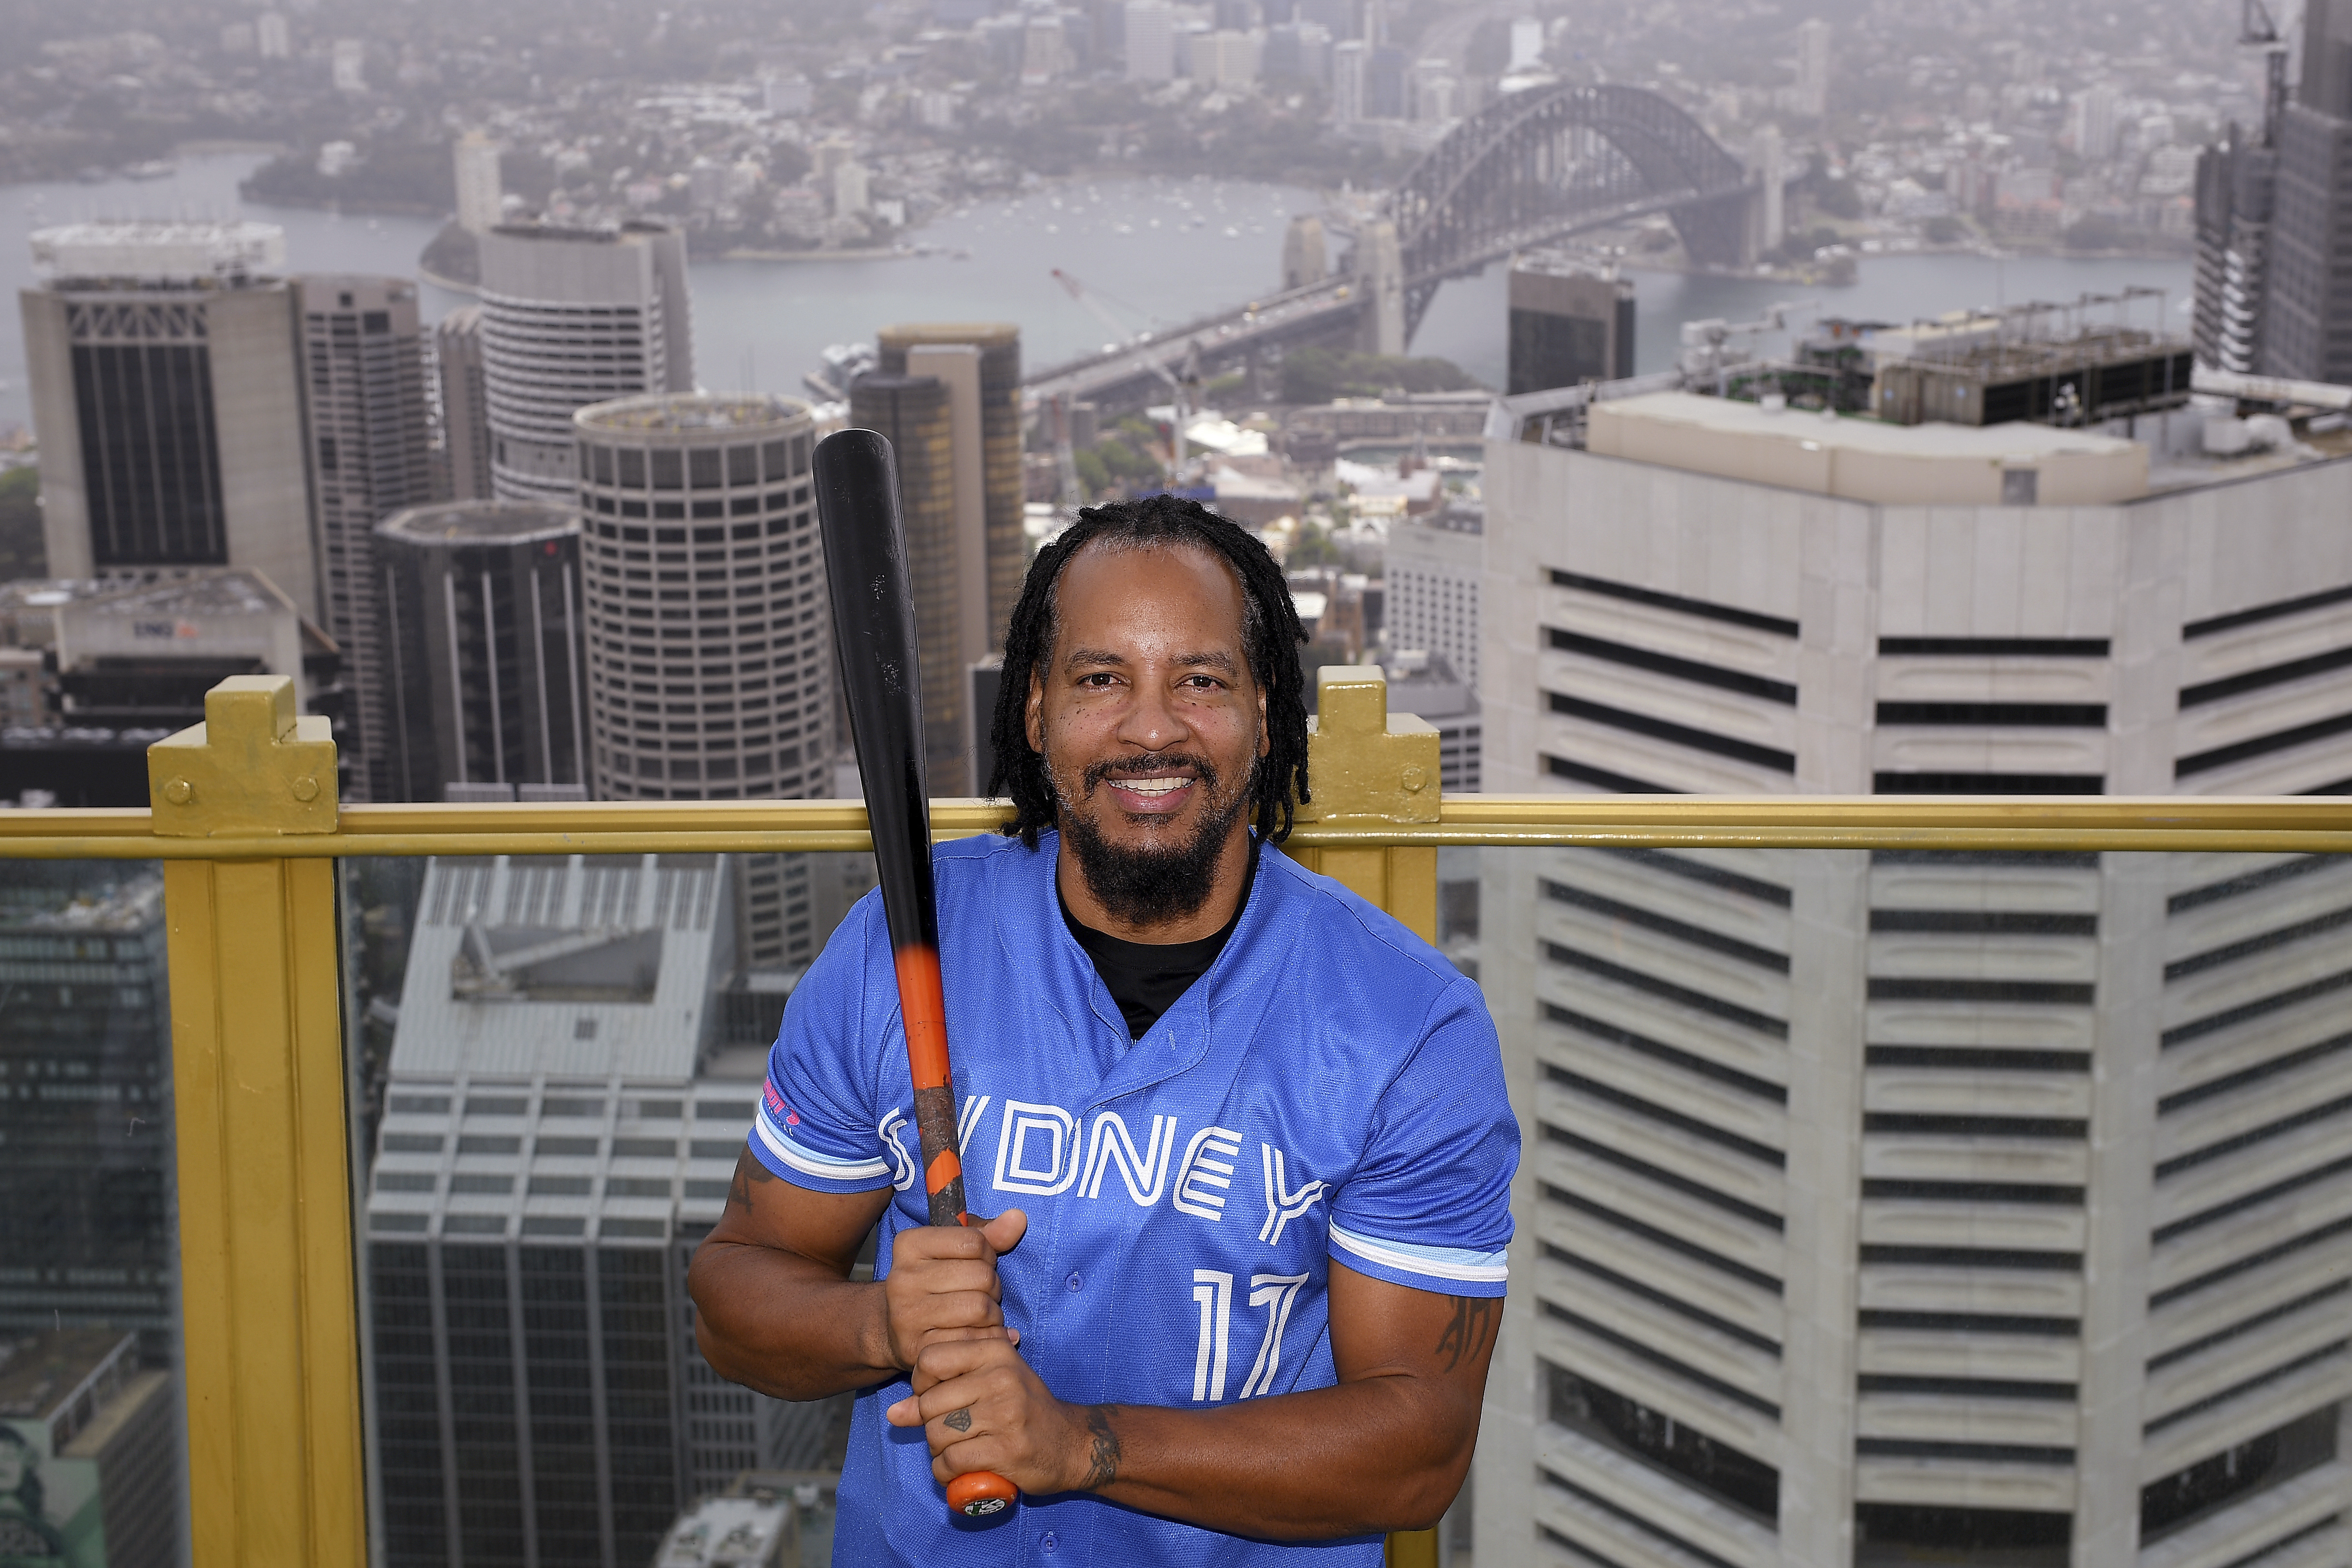 From the Boston Red Sox to the Sydney Blue Sox: Why Manny Ramirez